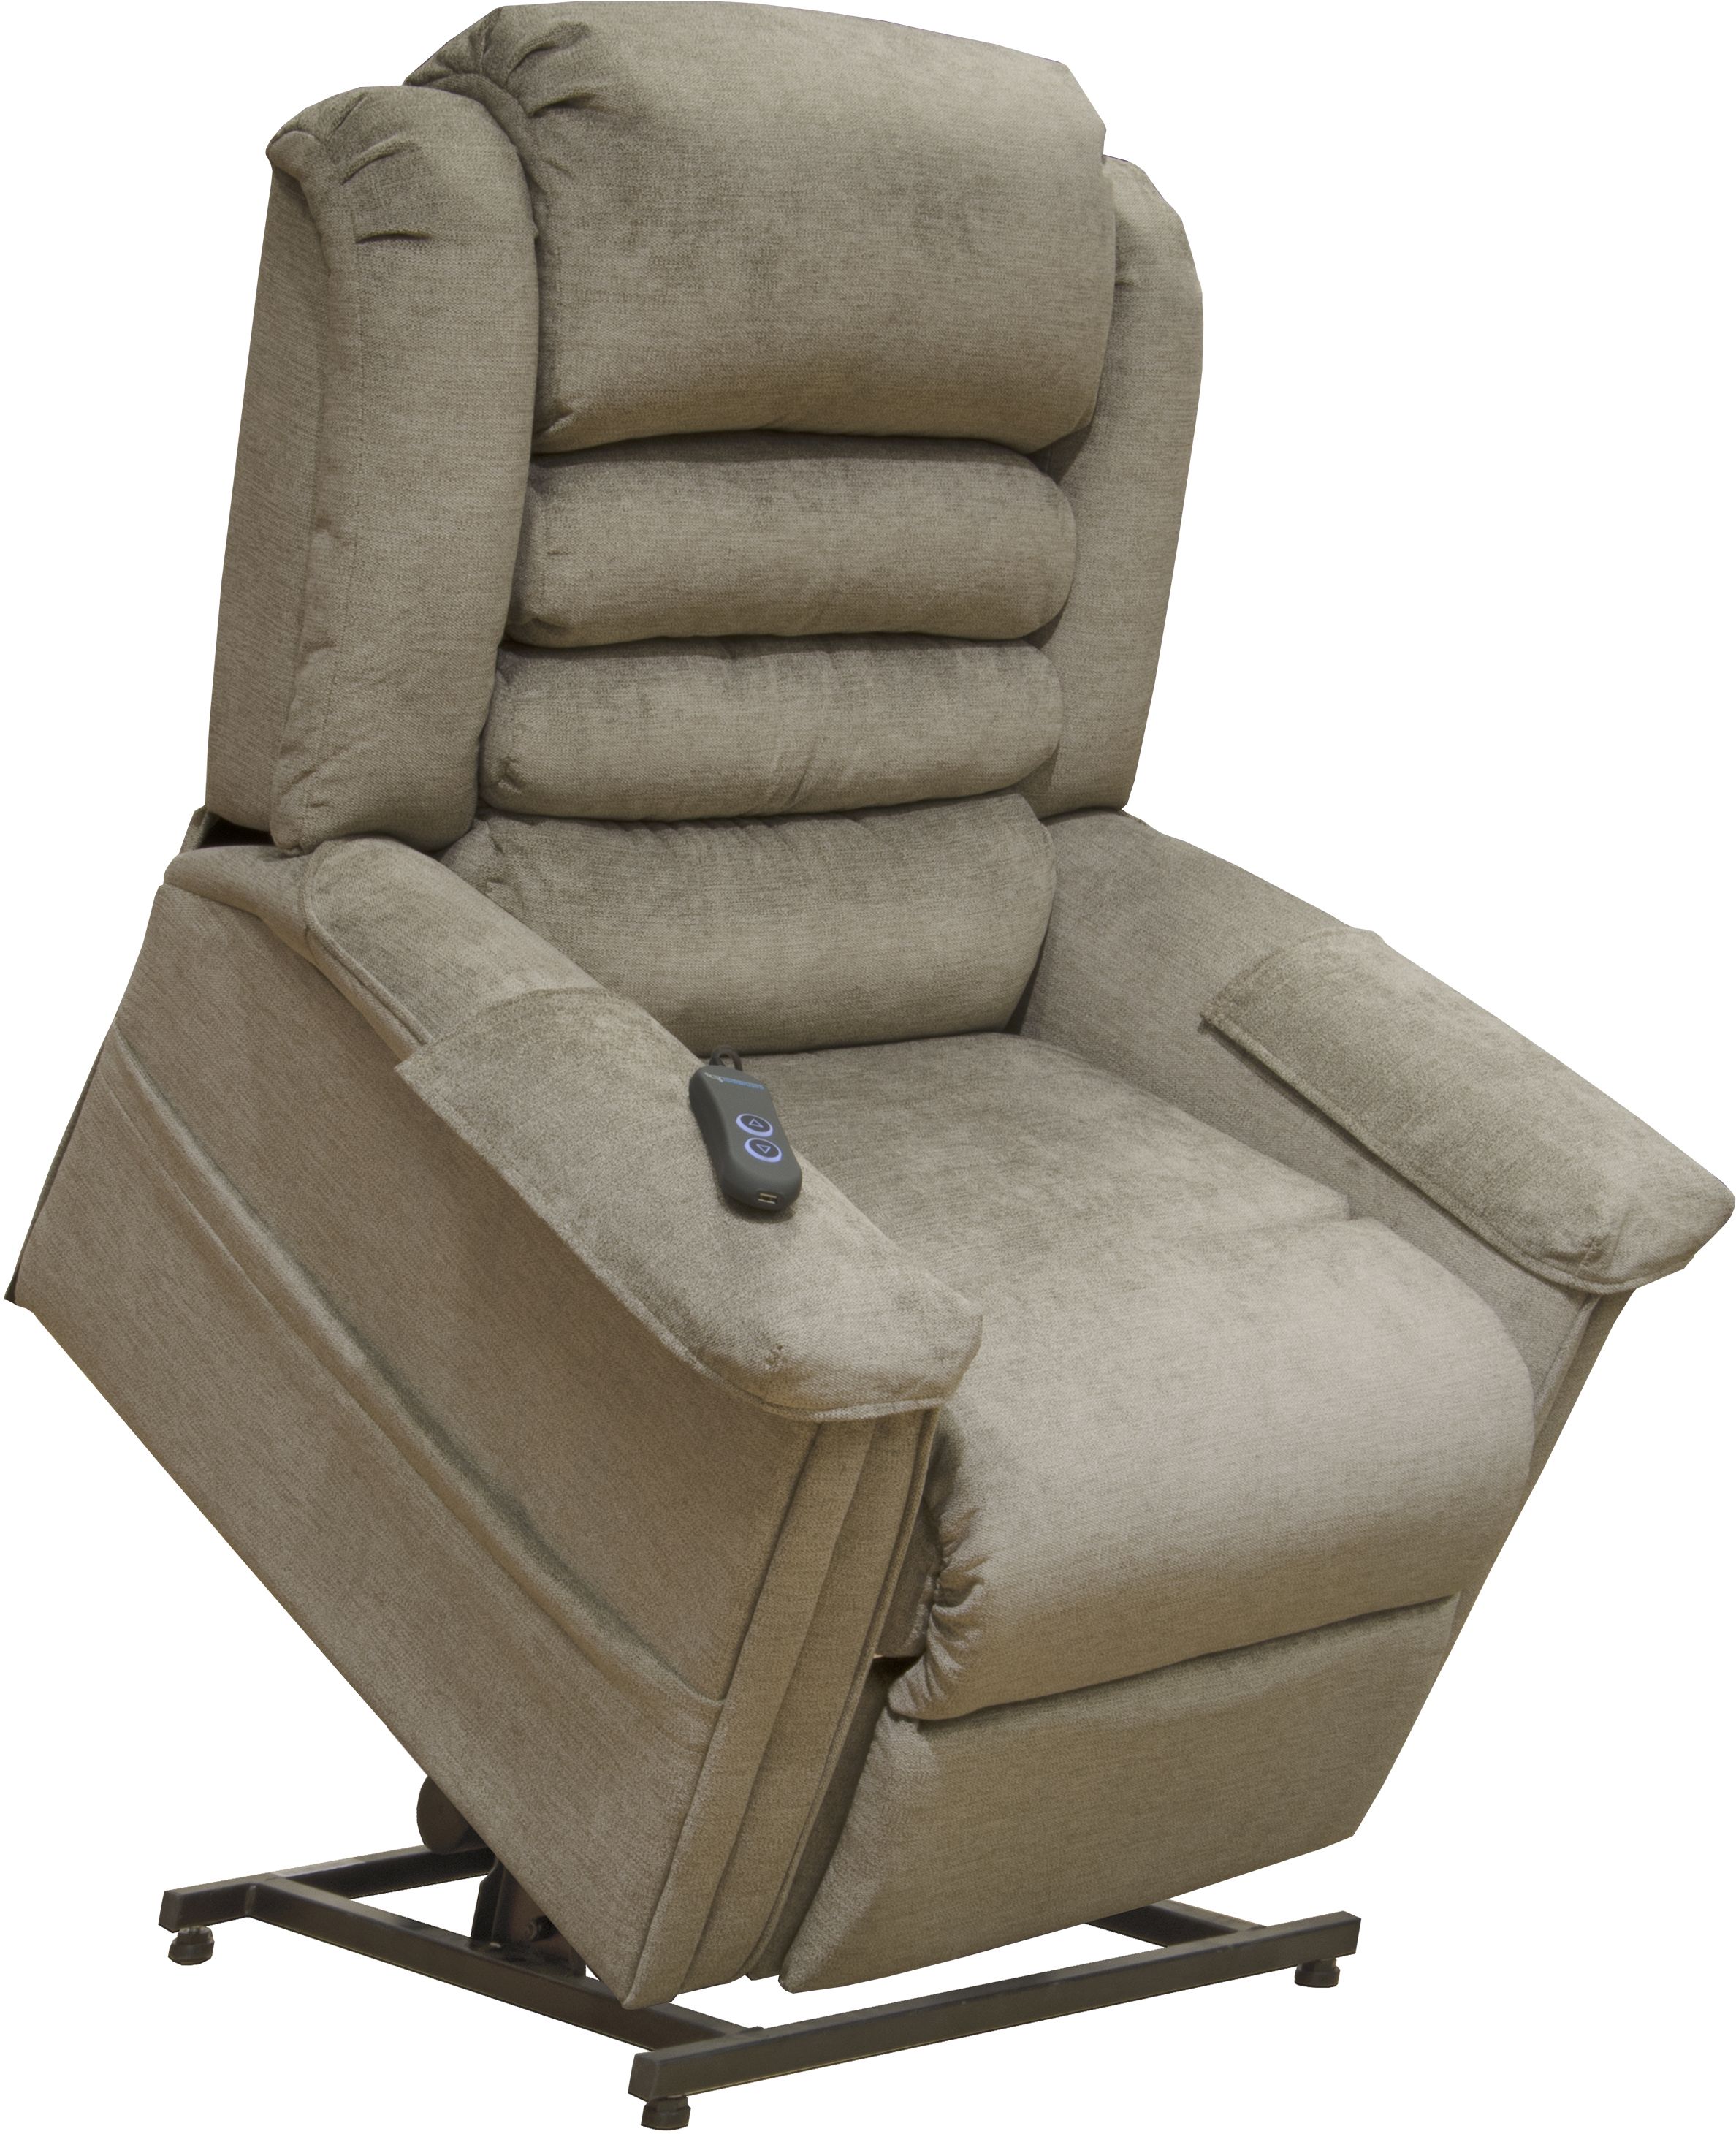 iAmerica Invincible Power Lift Full Lay-Out Chaise Recliner